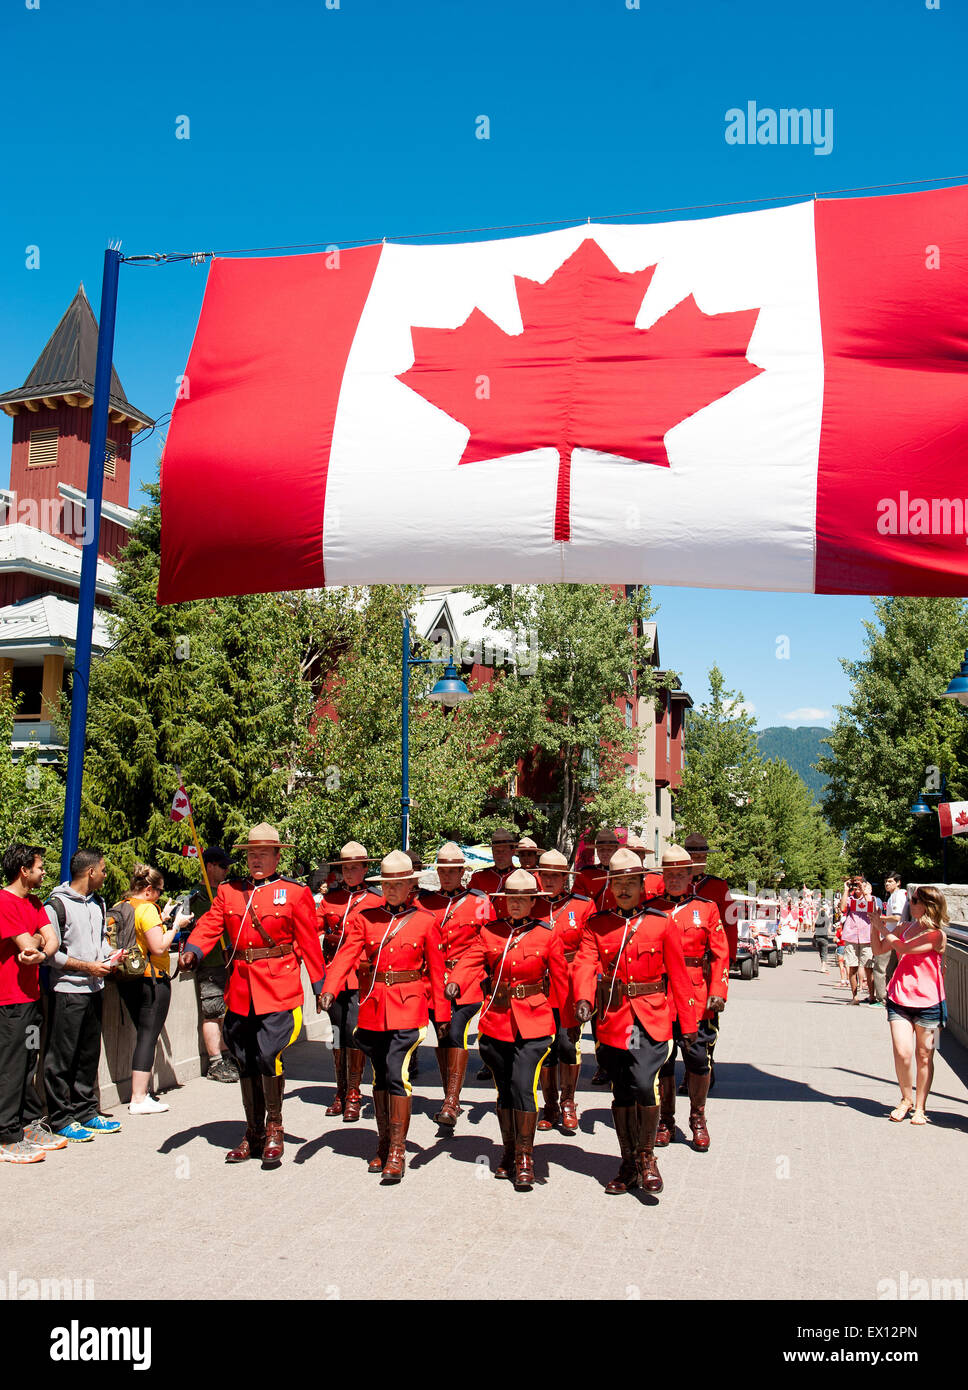 Royal Canadian Mounted Police officers parade under a Canadian flag in ceremonial red serge uniforms for Canada Day.  Canadian P Stock Photo